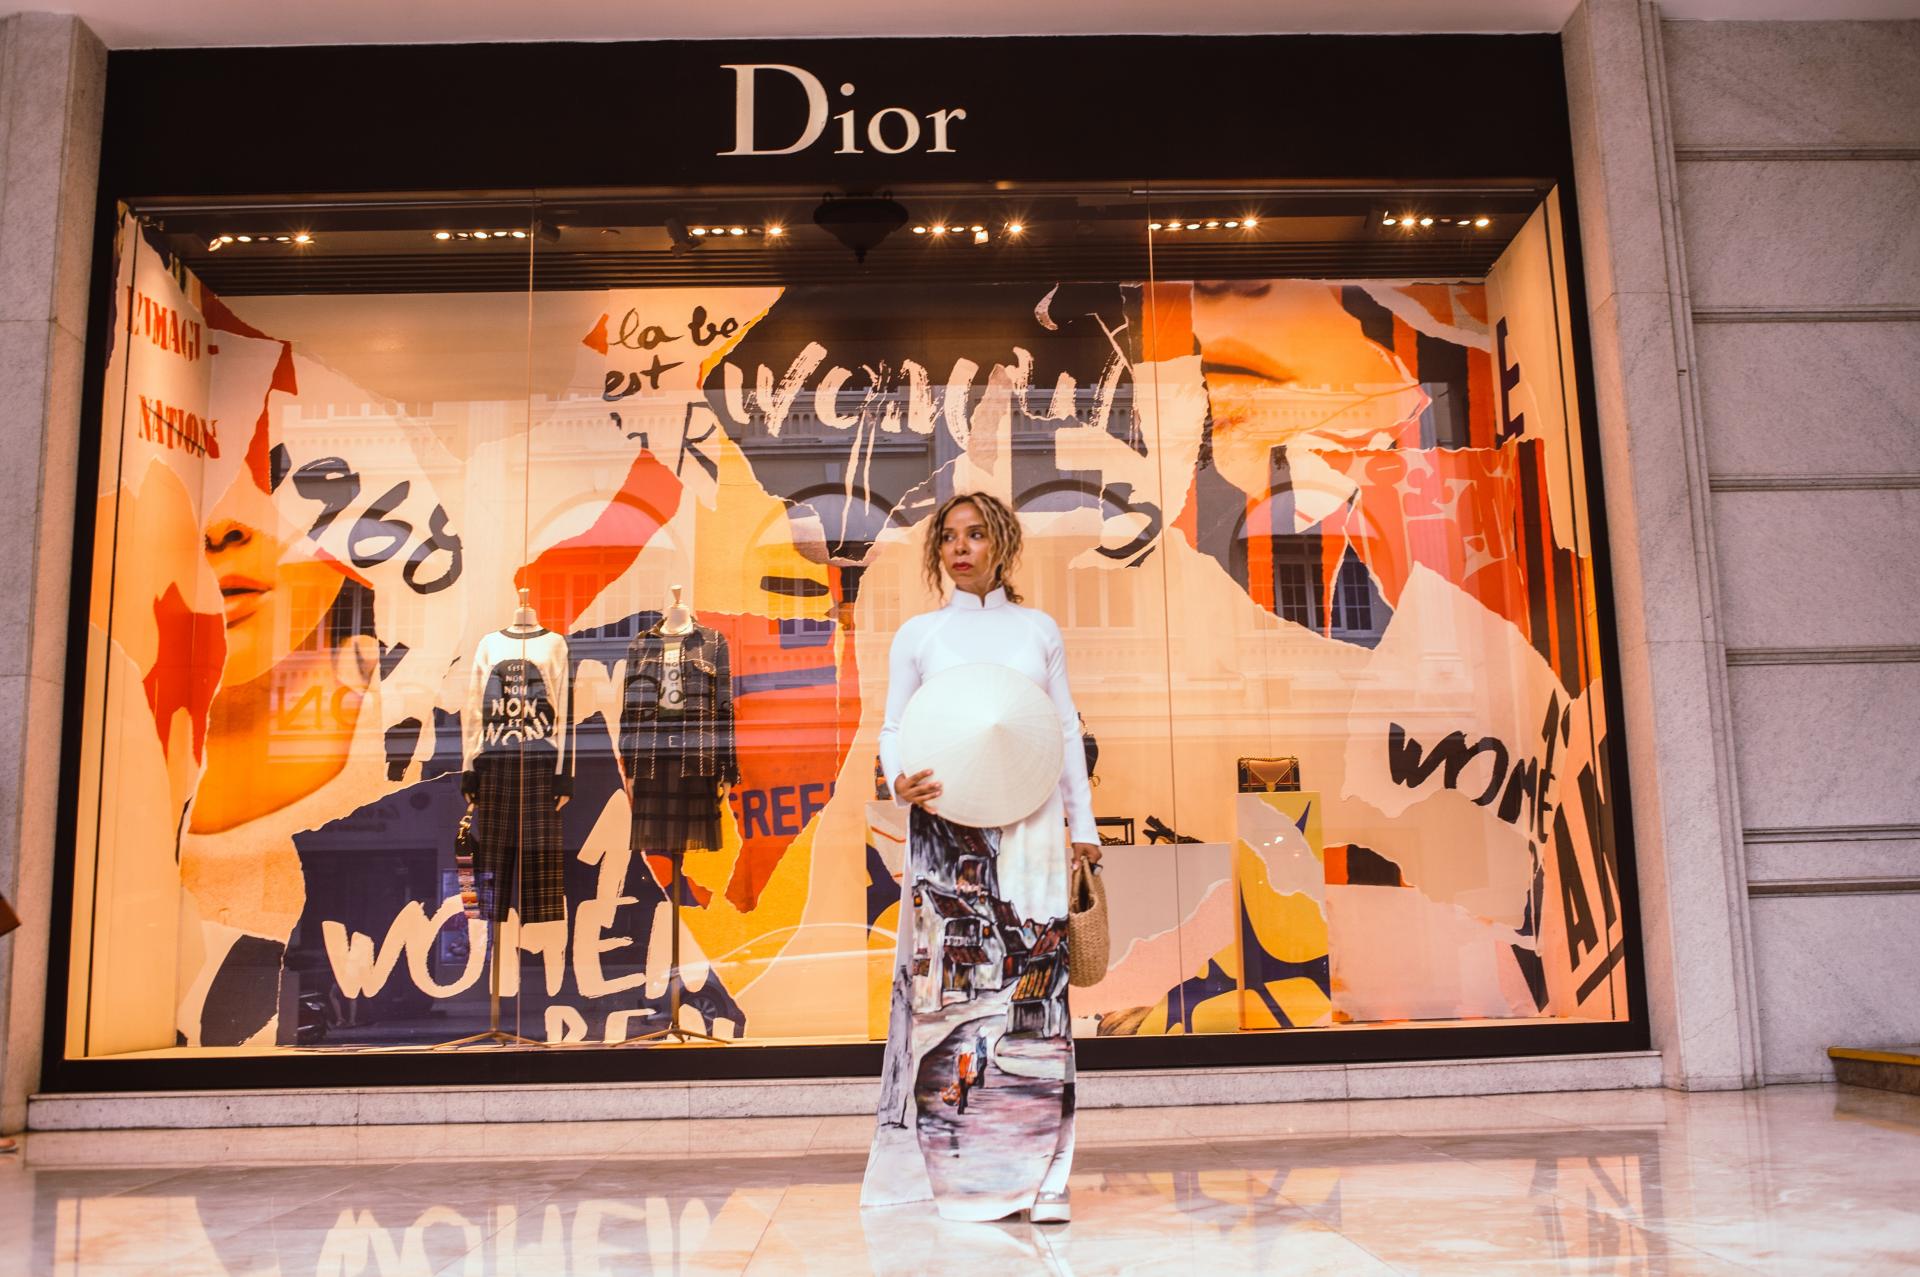 The Dior Gallery is the new Parisian spot to discover!